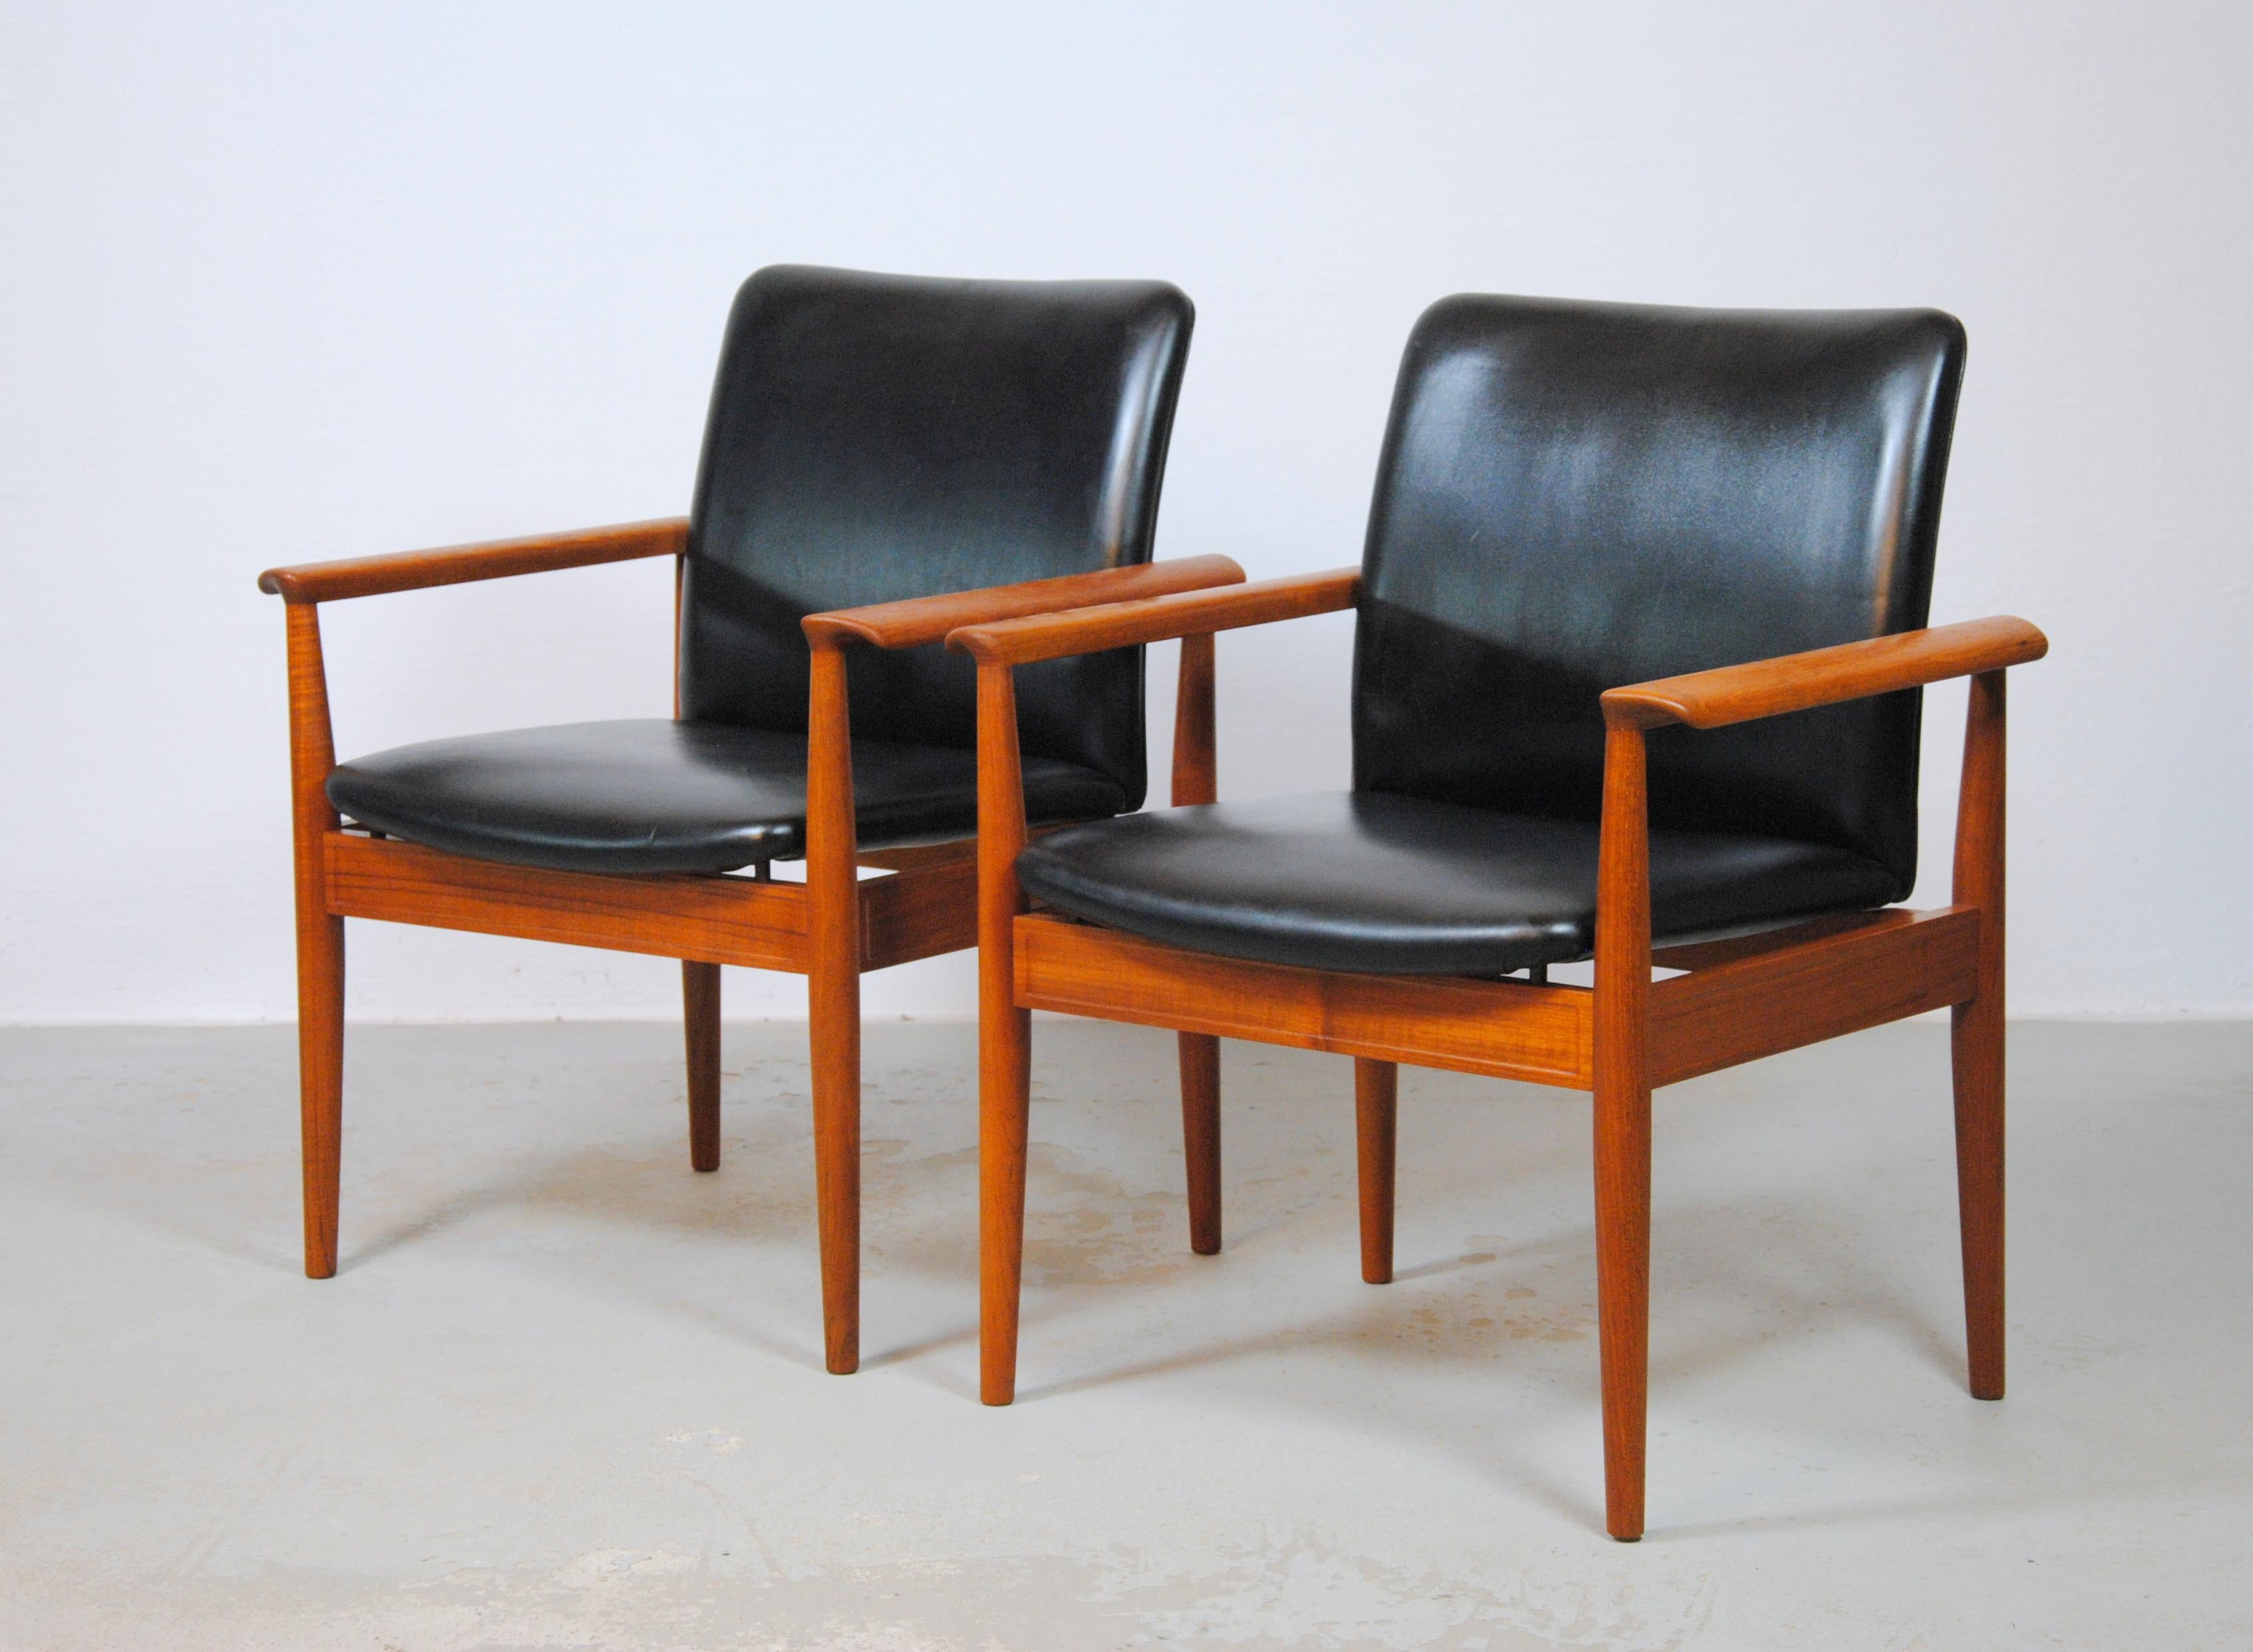 Scandinavian Modern 1960s Finn Juhl Set of Two Fully Restored Armchairs in Teak and Leather by Cado For Sale